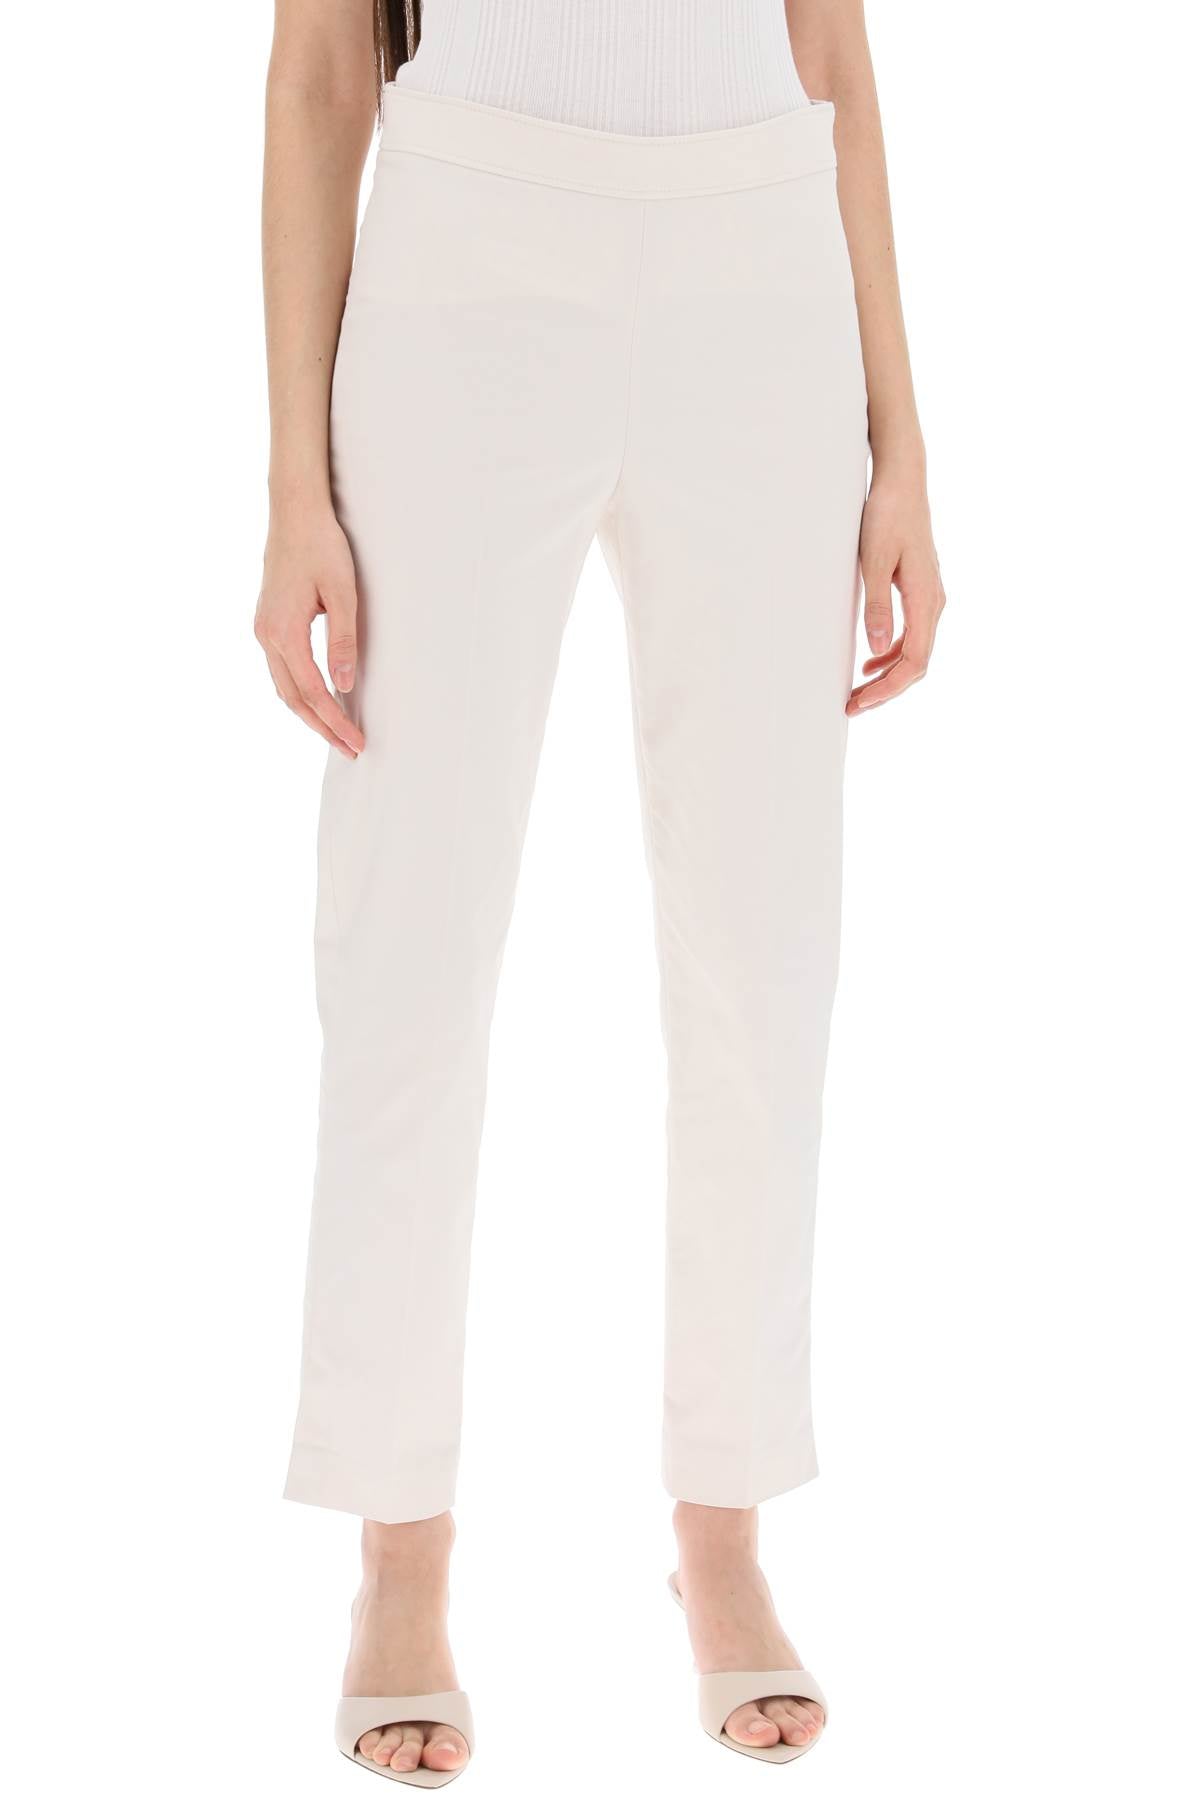 Brunello Cucinelli Capri Pants With Belt Loop And-women > clothing > trousers-Brunello Cucinelli-Urbanheer